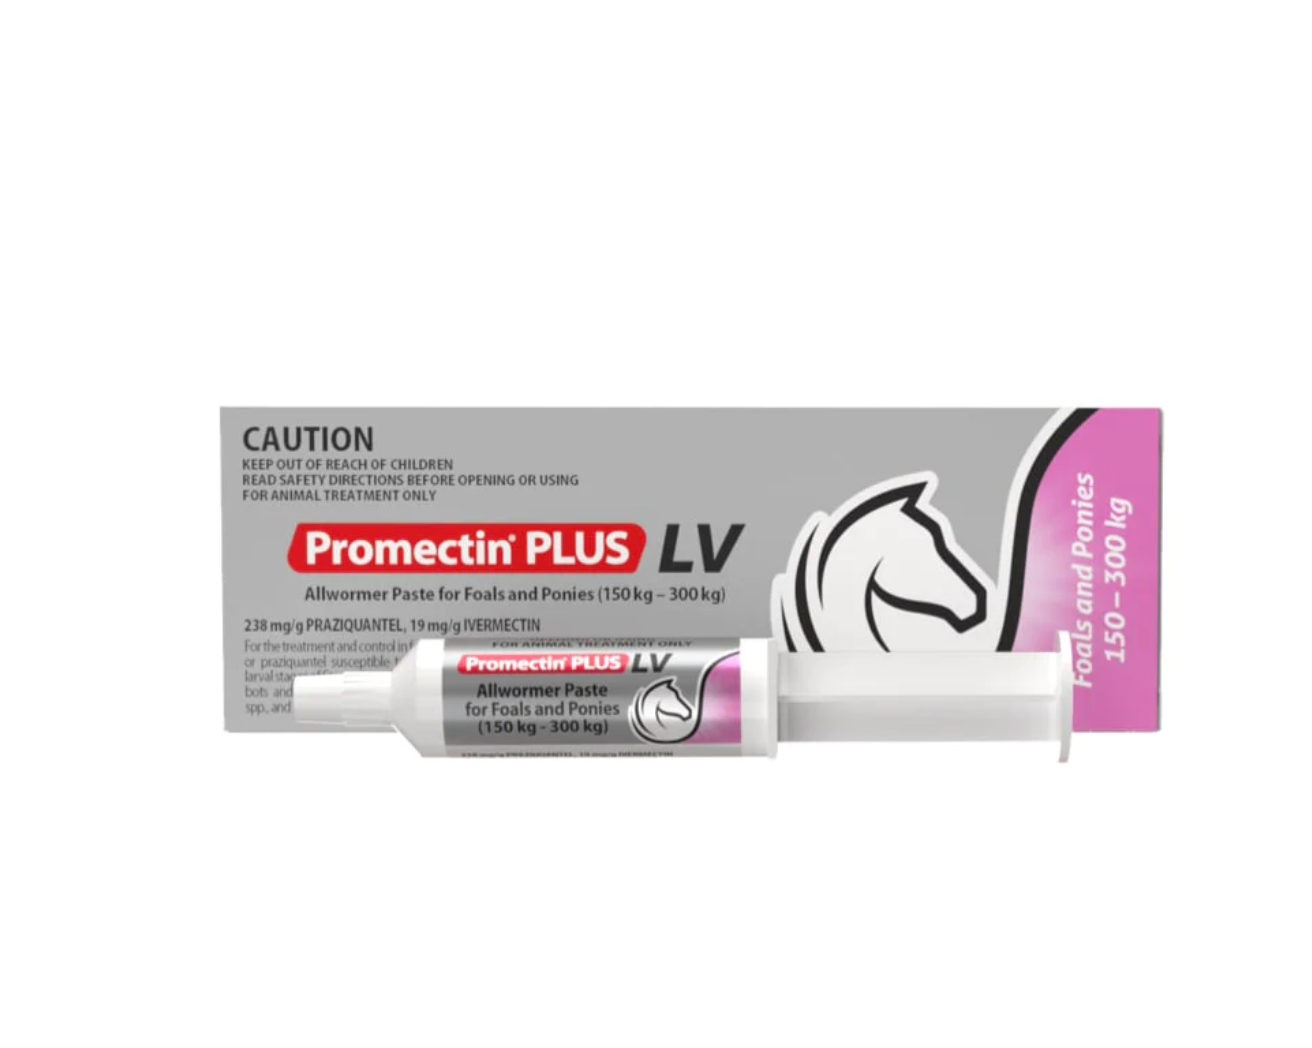 Promectin PLUS LV - Allwormer paste for foals & ponies